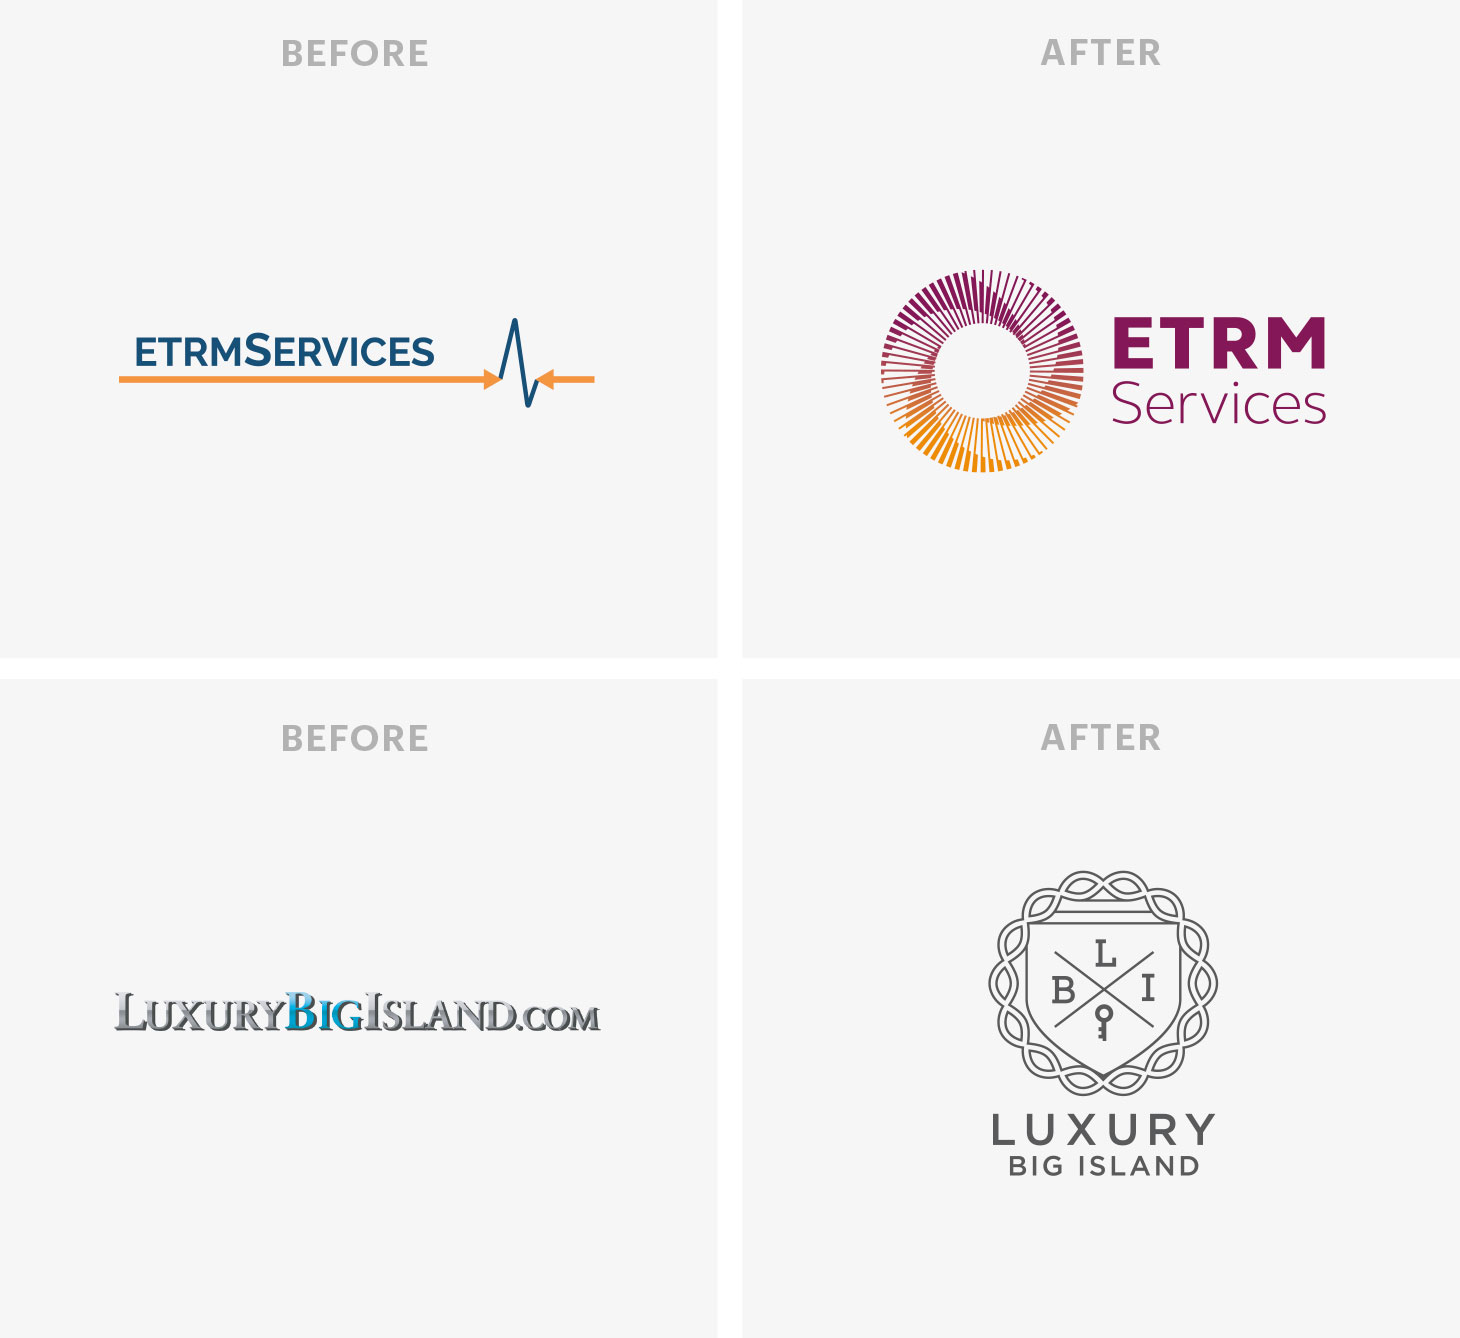 Logos Before and After